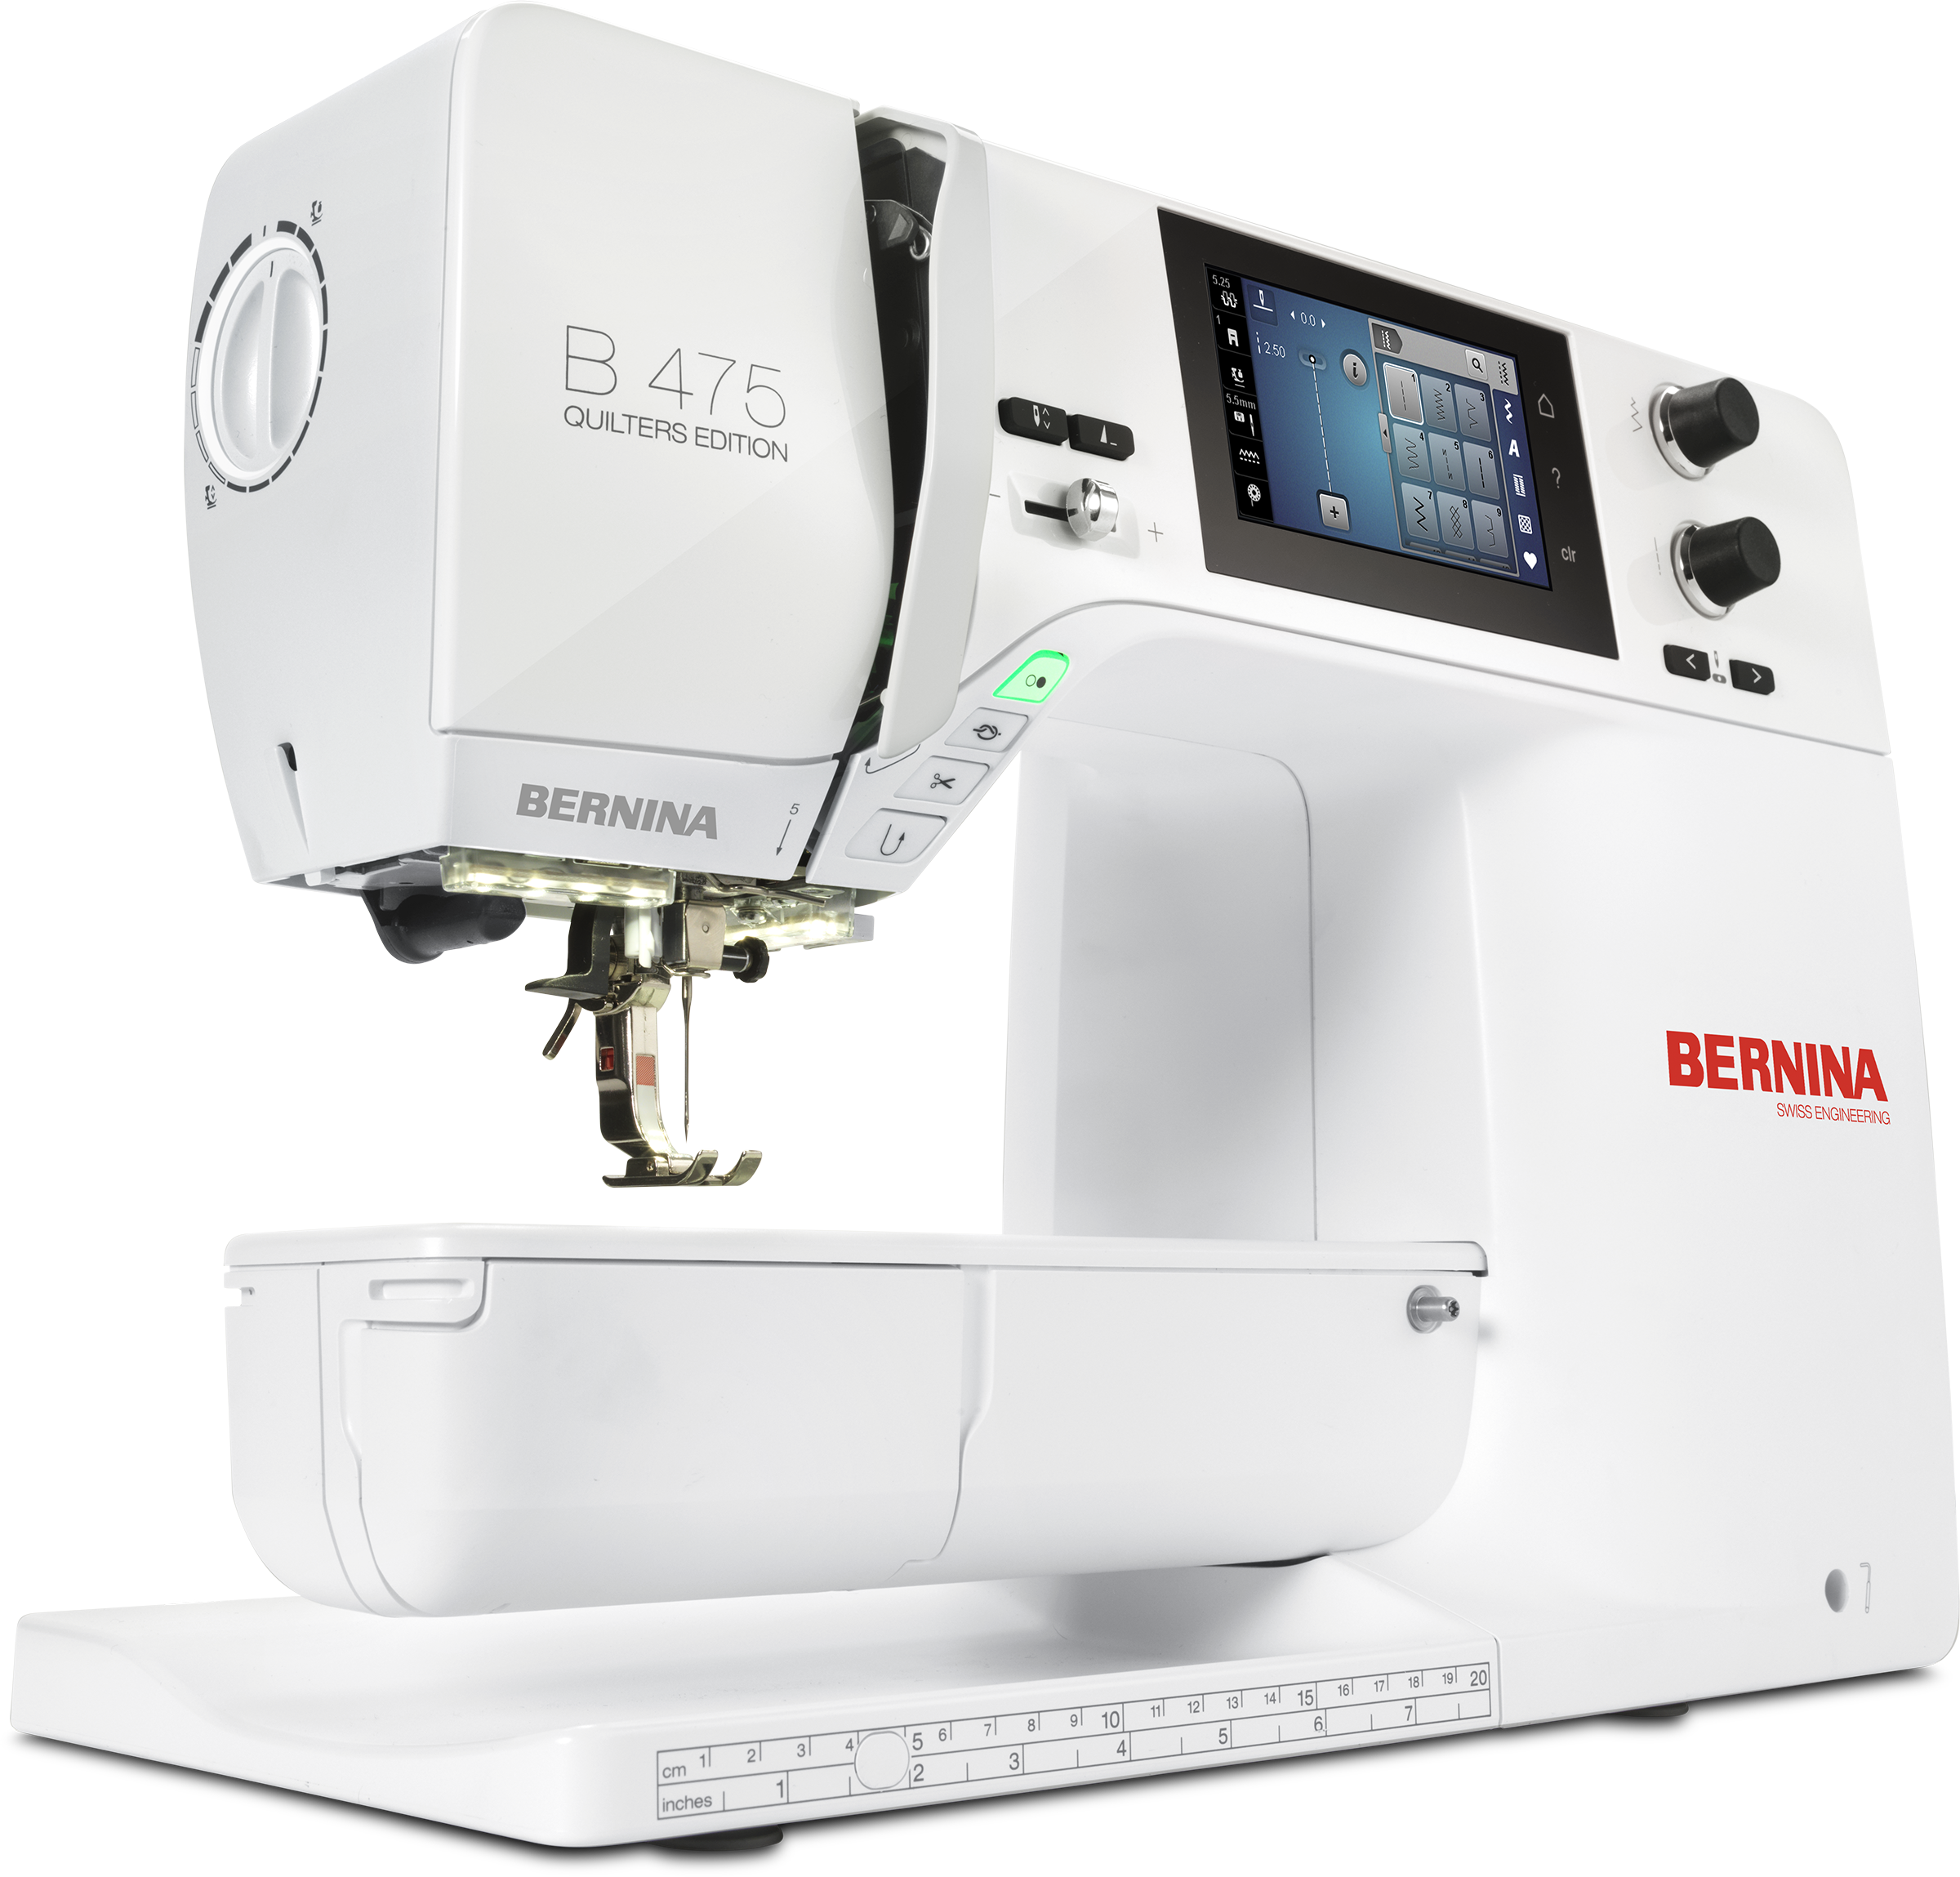 angled image of the BERNINA 475 Quilter's Edition Sewing Machine